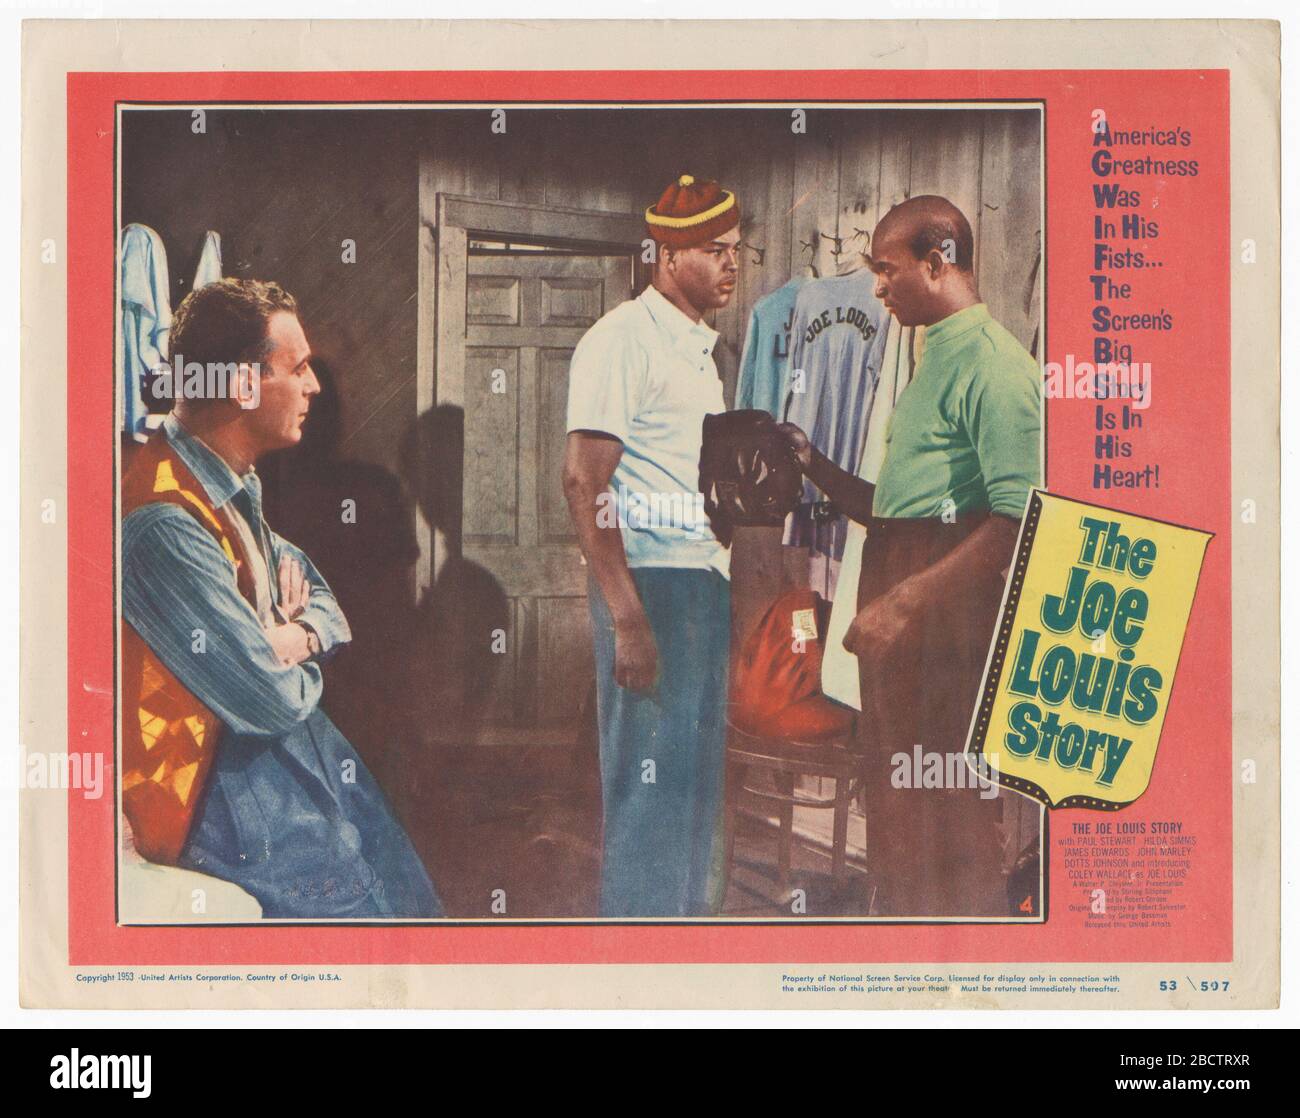 Lobby card for The Joe Louis Story. Color lobby card from the 1953 film “The Joe Louis Story,' The card features a scene between Coley Wallace, Paul Stewart, and James Edwards. The poster is copyrighted 1953 by United Artists Corporation and was distributed by the National Screen Service. Lobby card for The Joe Louis Story Stock Photo